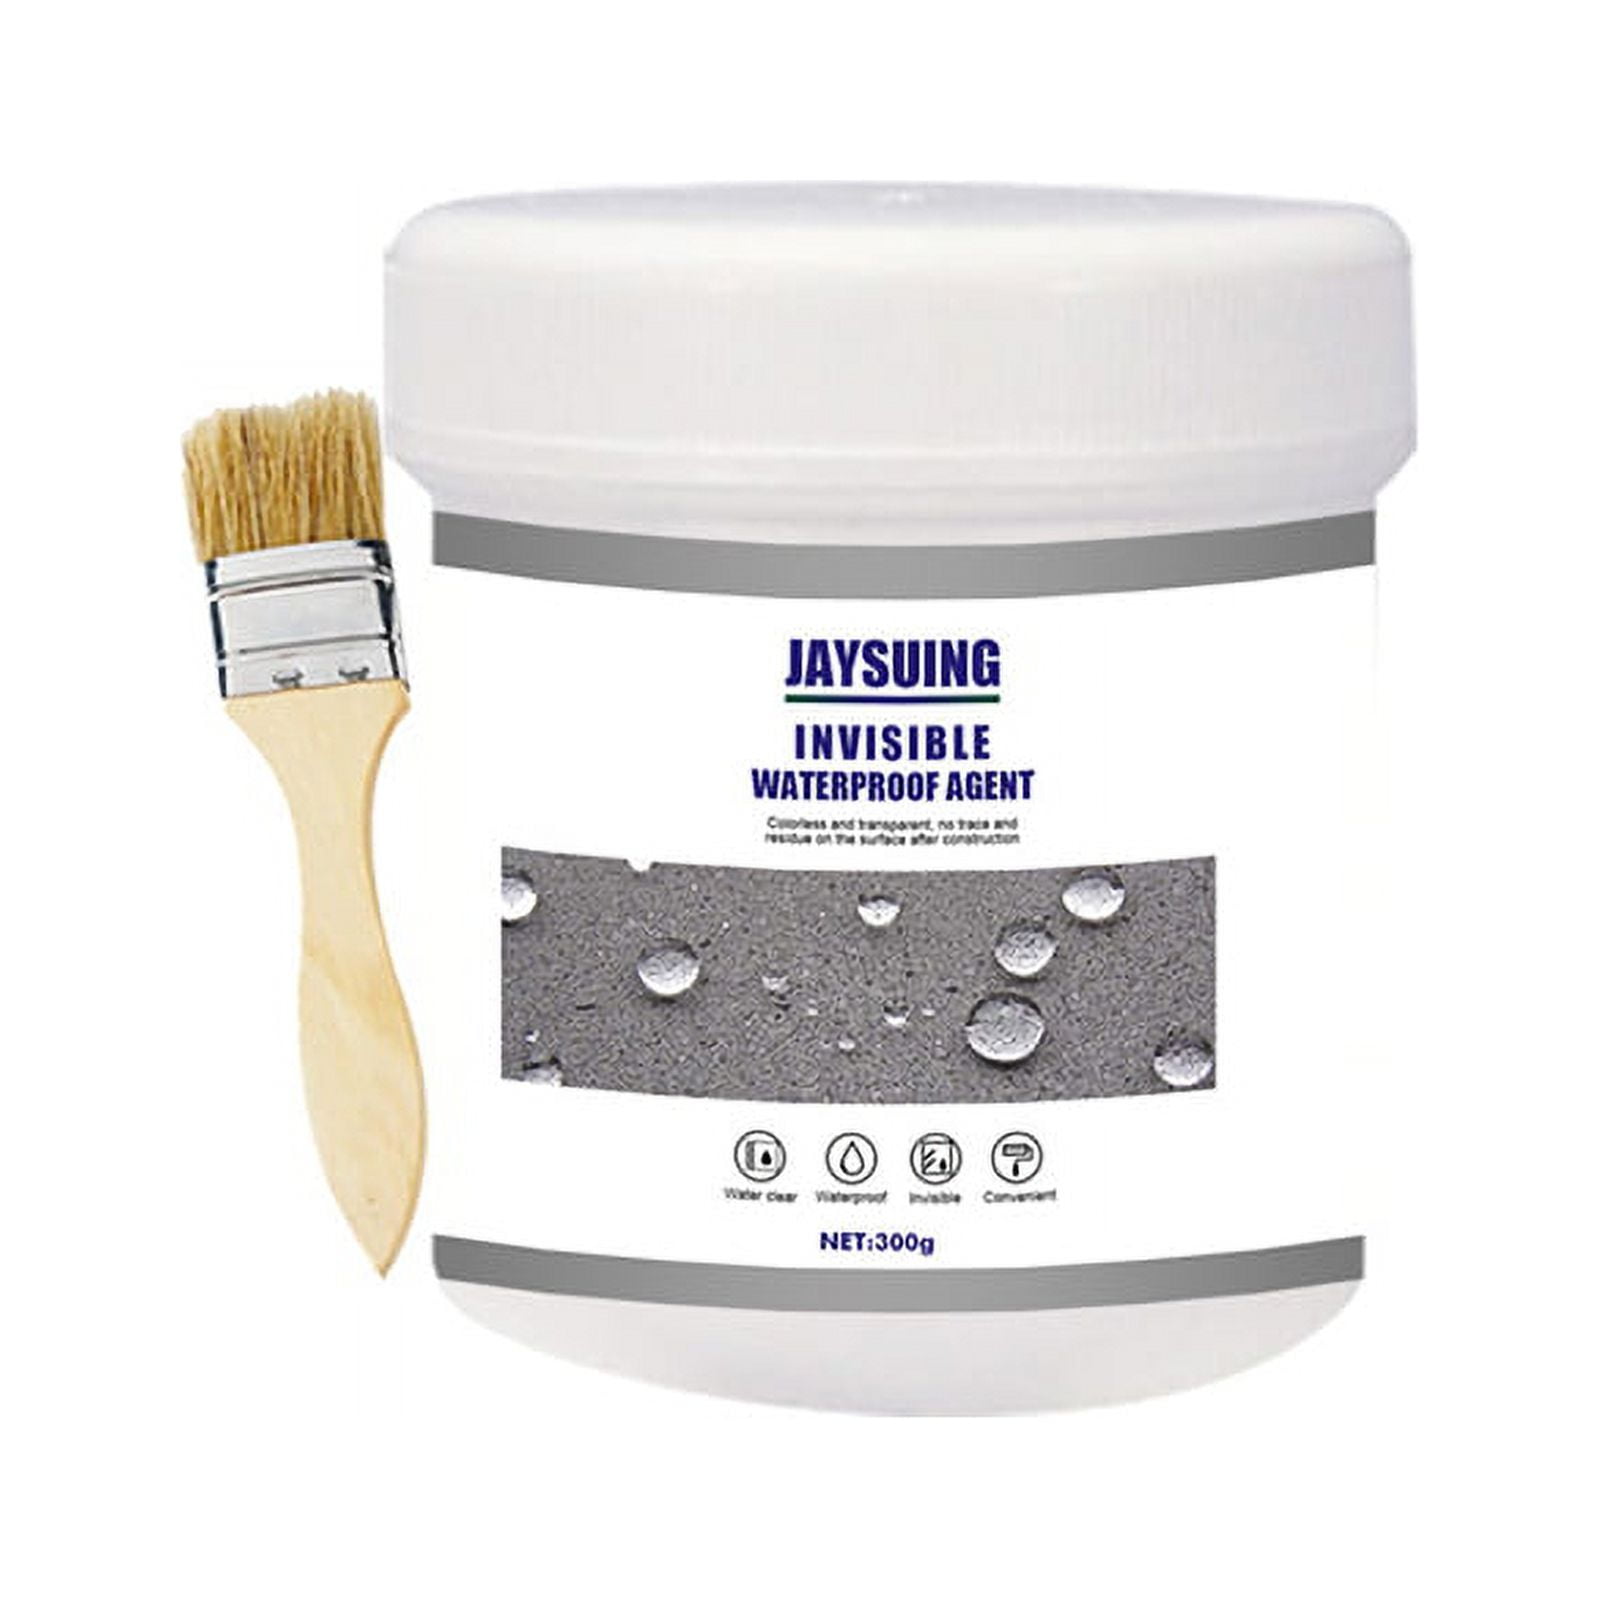 Tiitstoy Super Strong Invisible Waterproof Anti-Leakage Agent, Waterproof  Insulation Sealant Clear, Transparent Waterproof Glue for Outdoors, Super  Strong Adhesive Seal Coating (300g) 